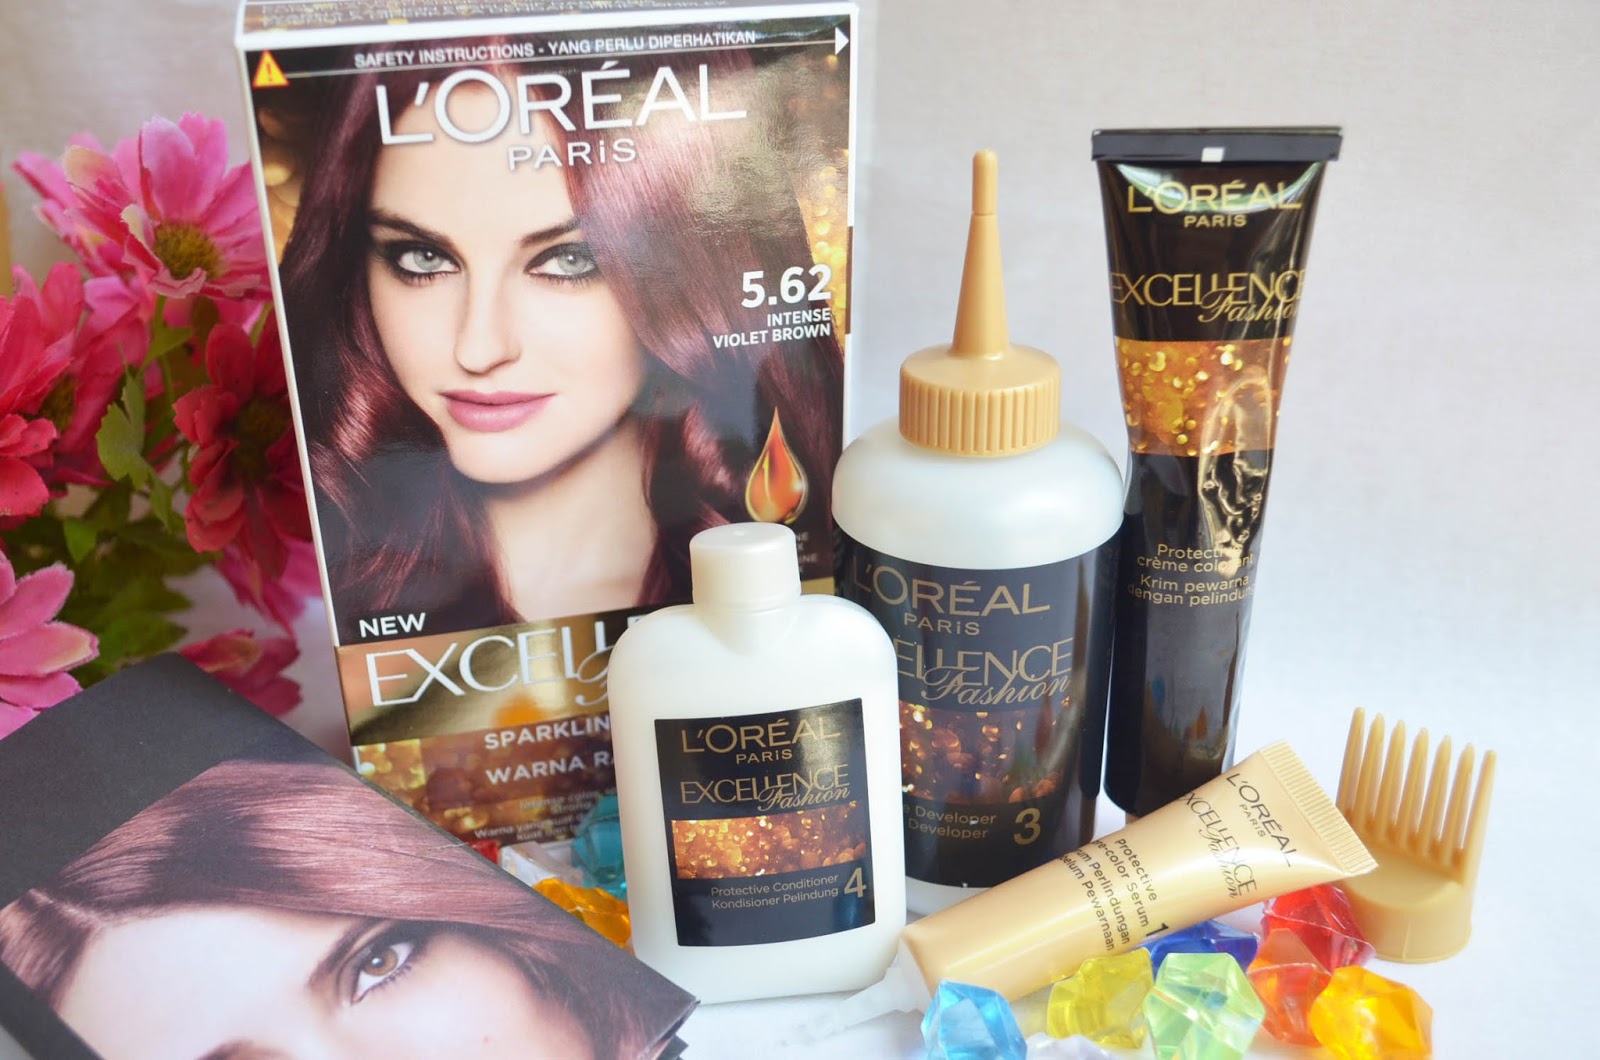  CAT  RAMBUT  LOREAL  EXCELLENCE FASHION VIOLET BROWN 5 62 